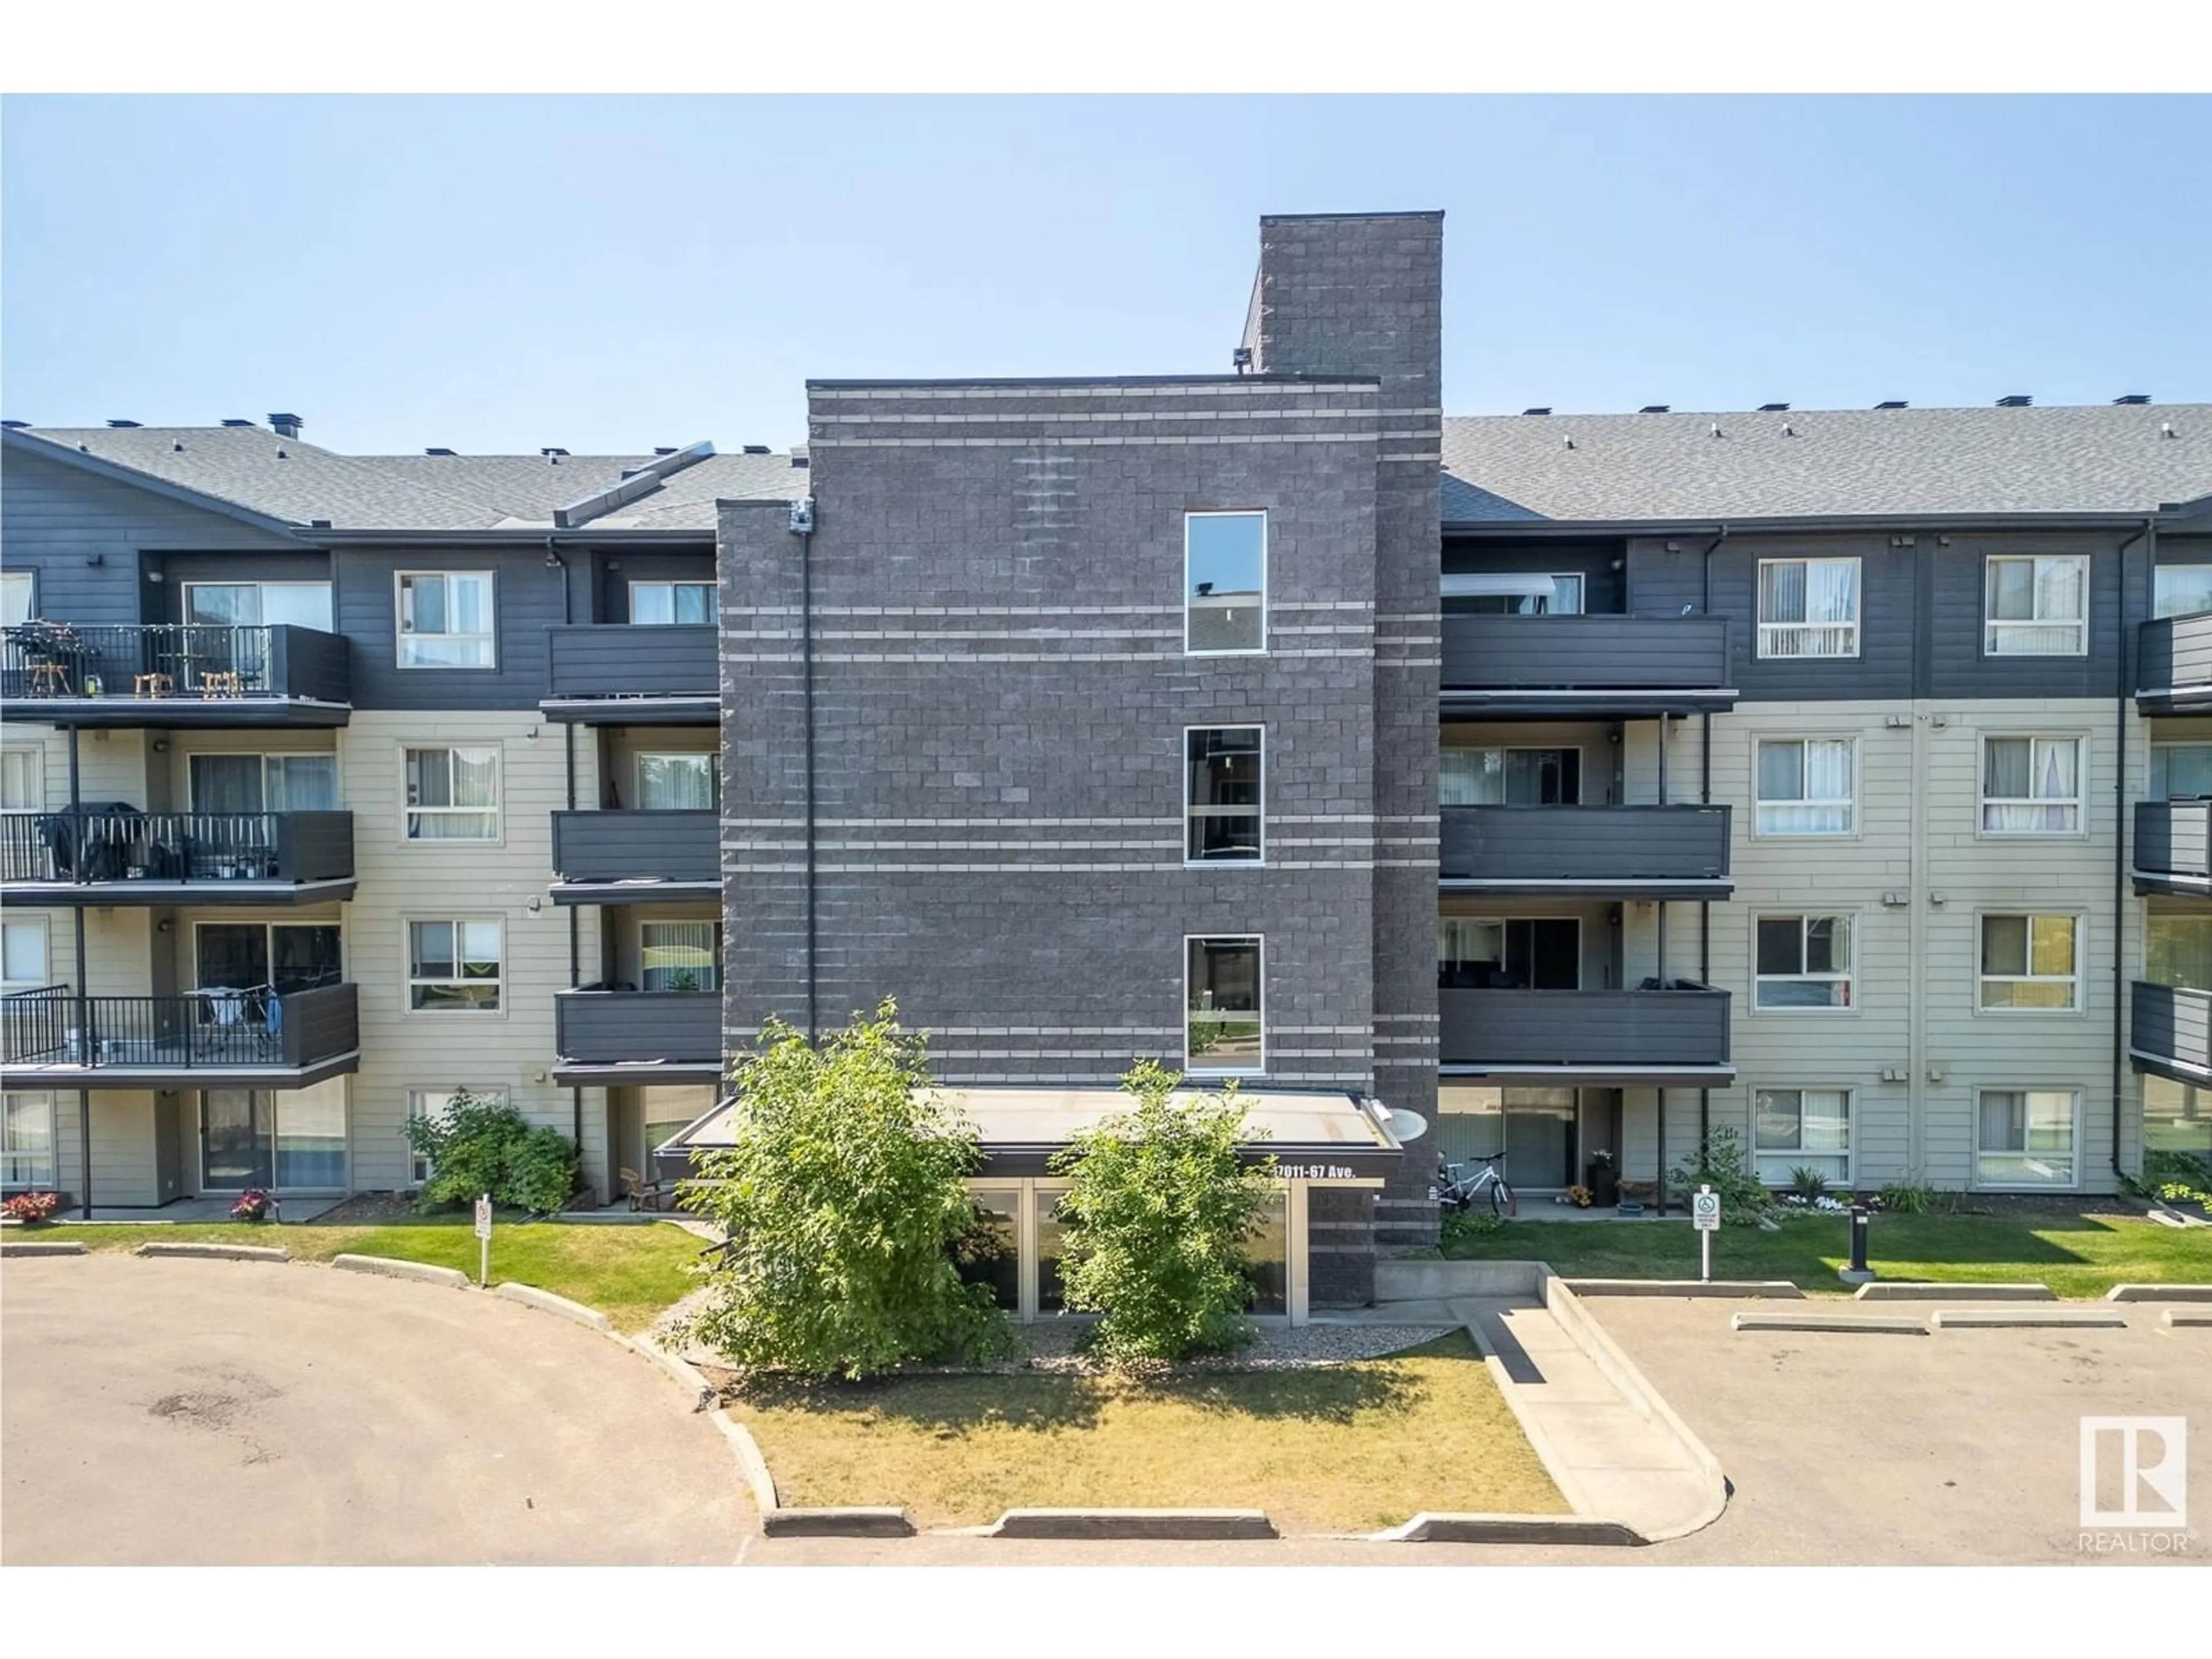 A pic from exterior of the house or condo for #319 17011 67 AV NW, Edmonton Alberta T5T6Y6